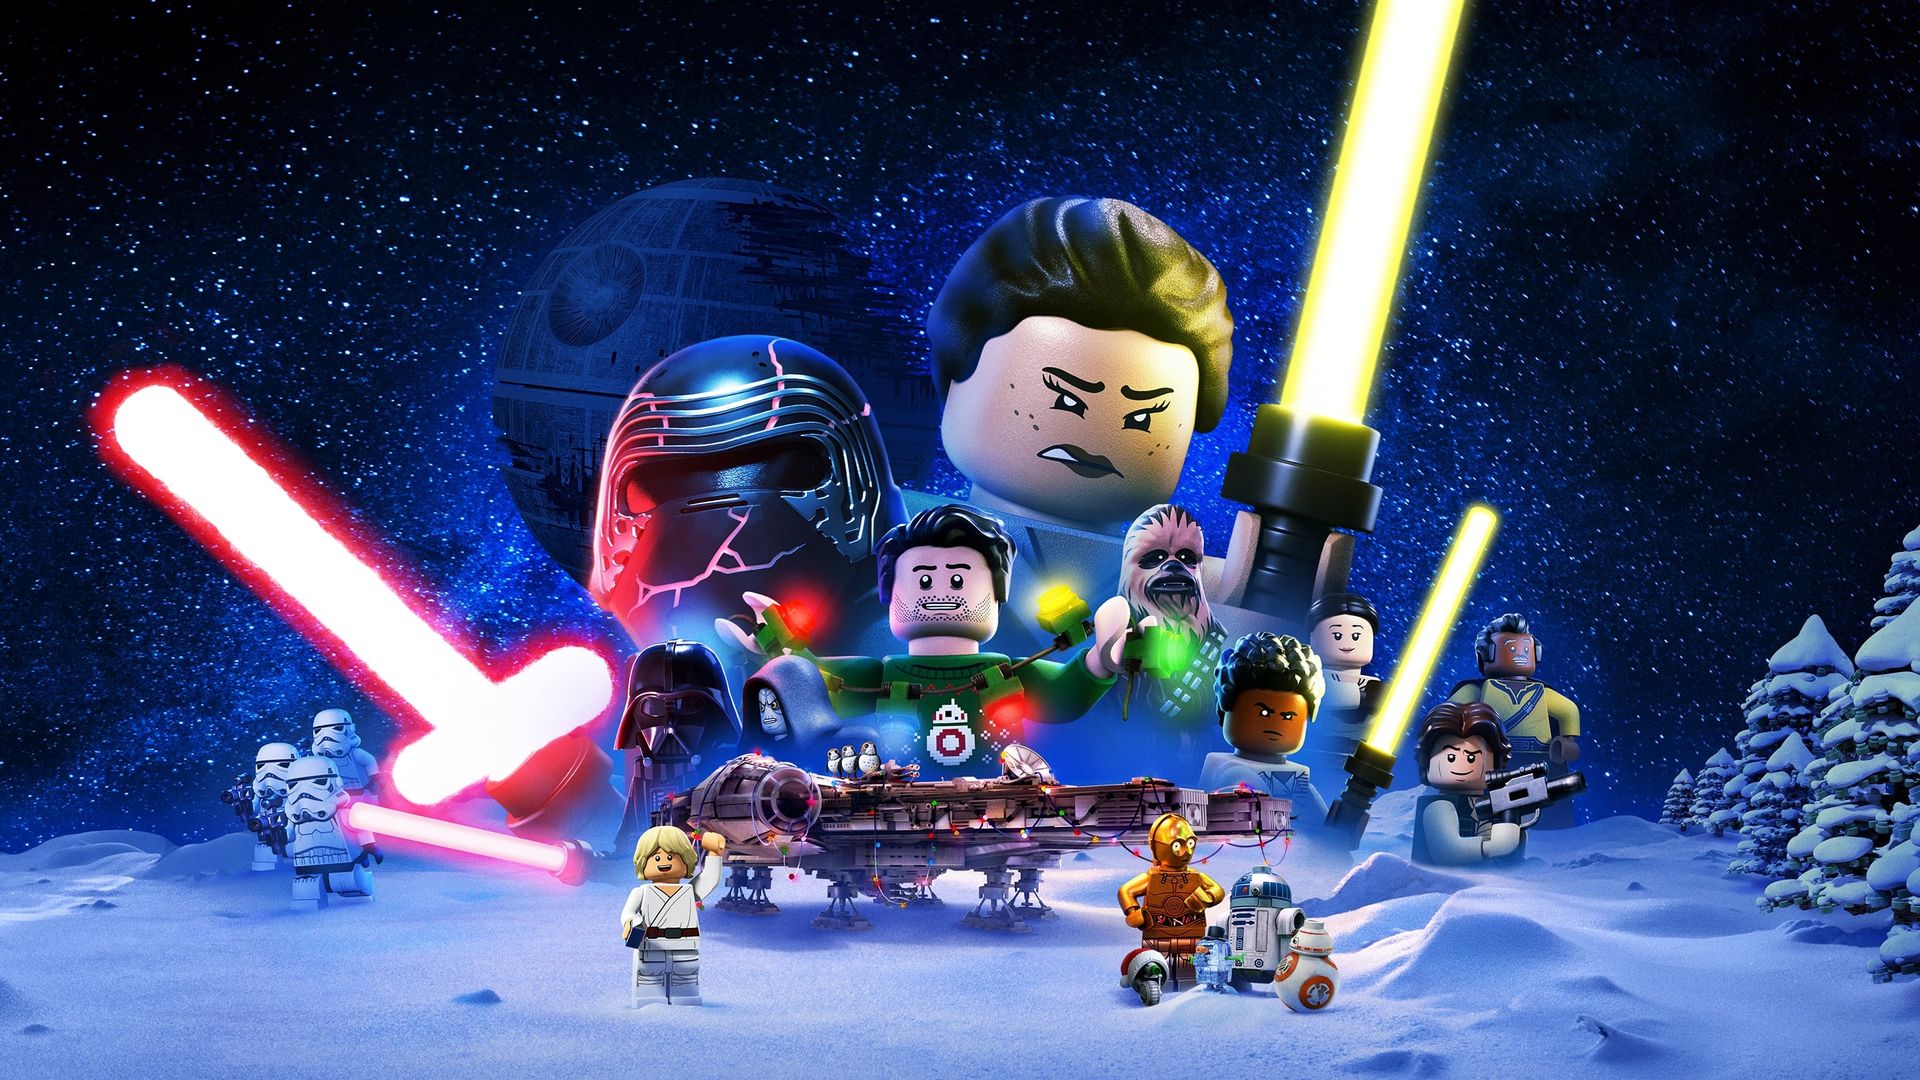 The Lego Star Wars Holiday Special background